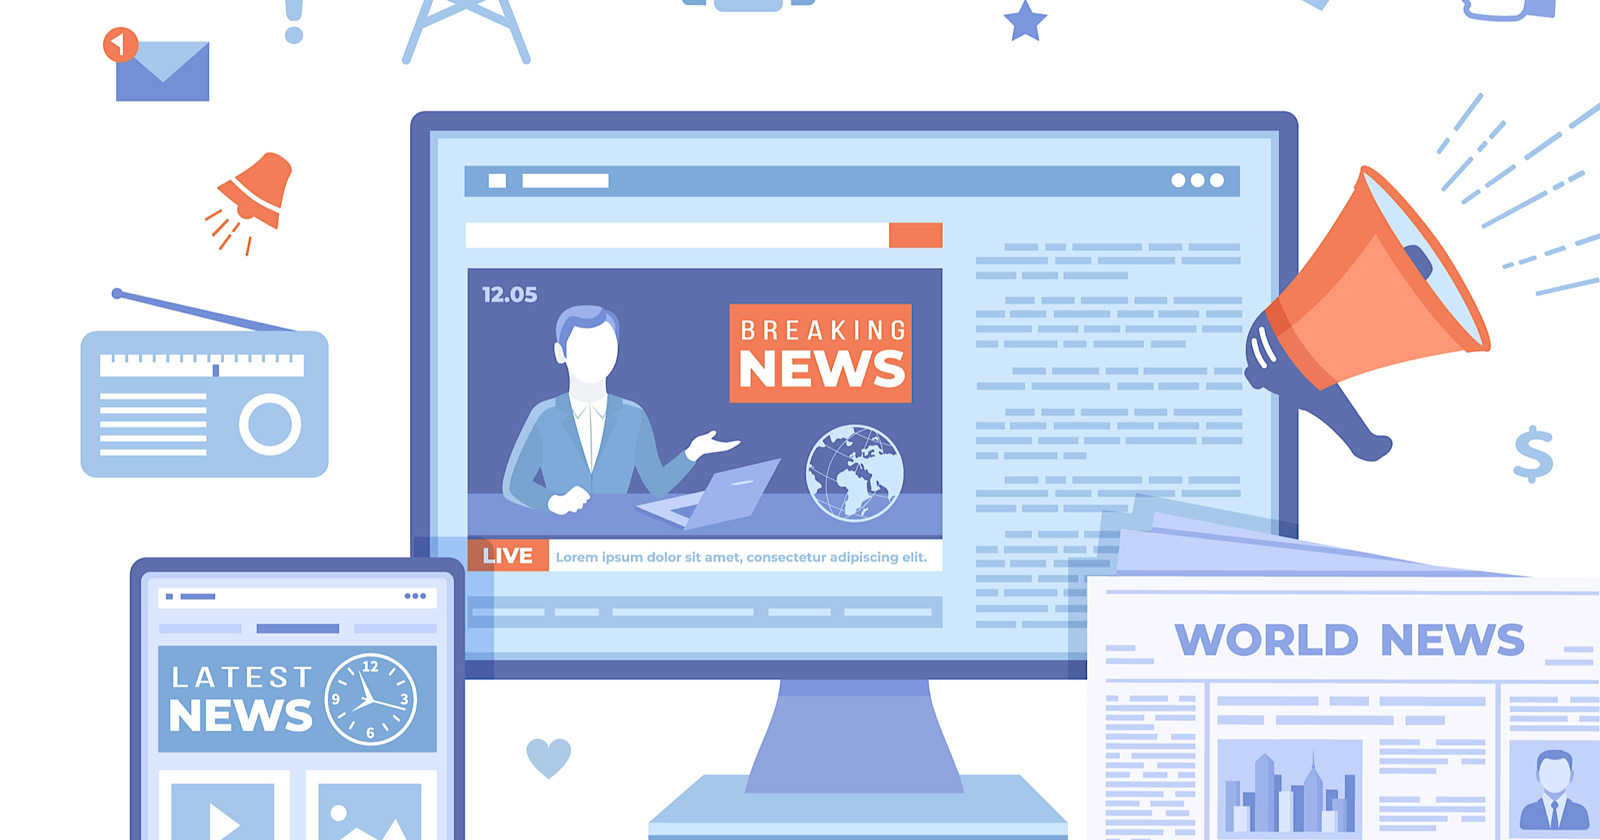 google on seo best practices for news sites short articles via mattgsouthern